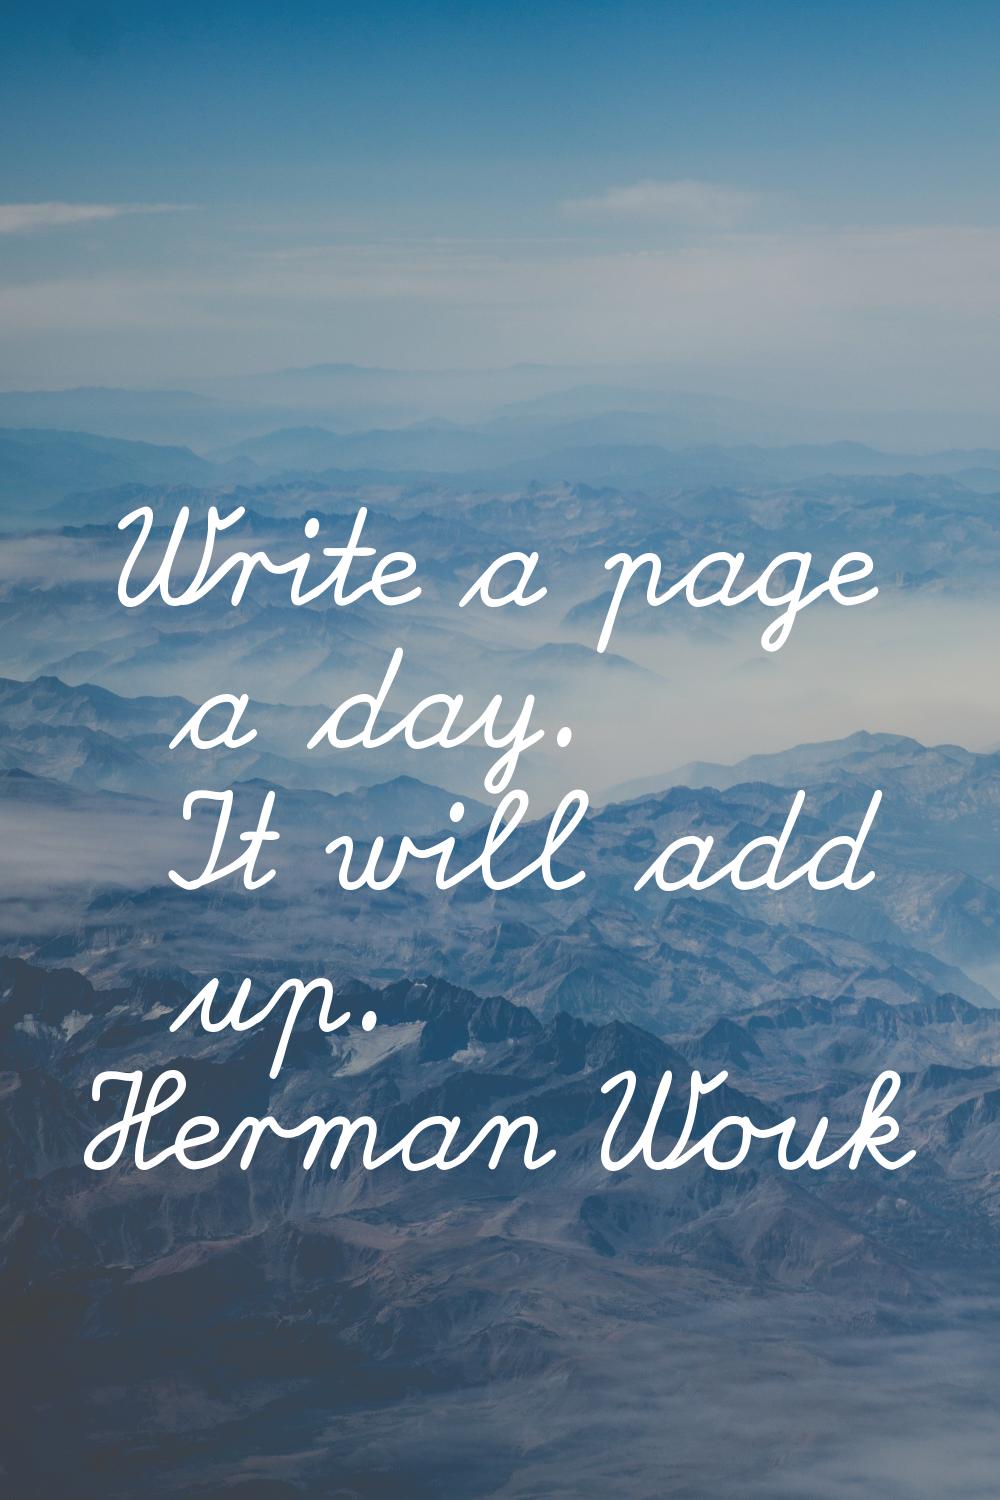 Write a page a day. It will add up.